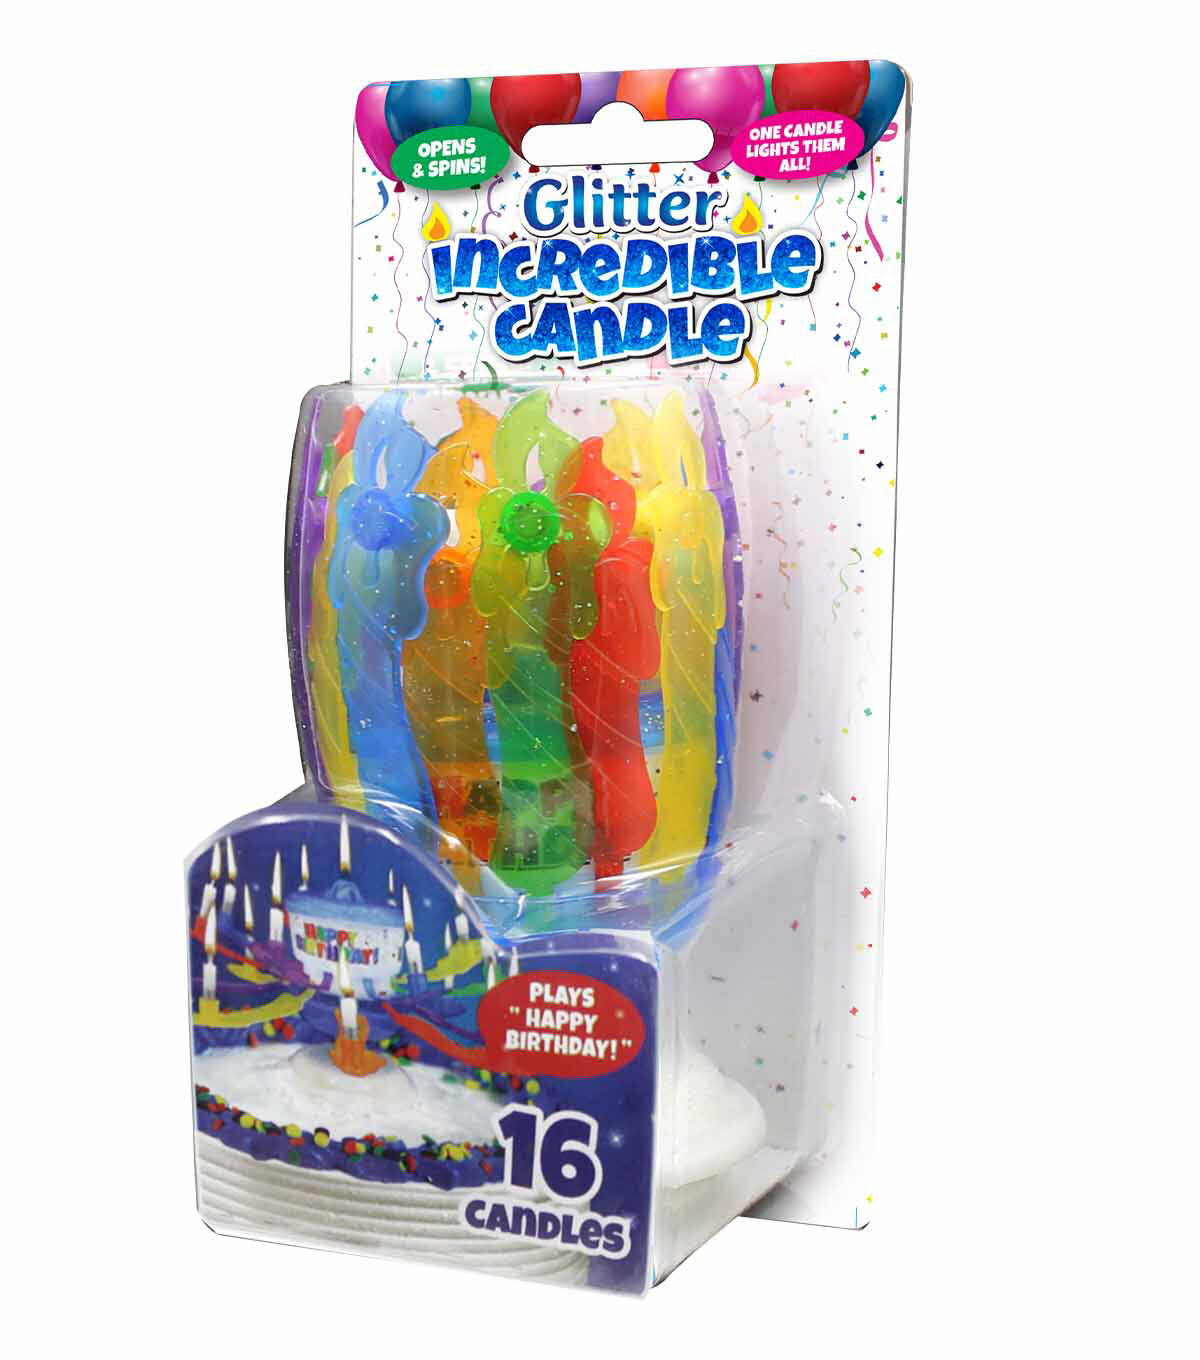 Glitter Incredible Candle | Candles